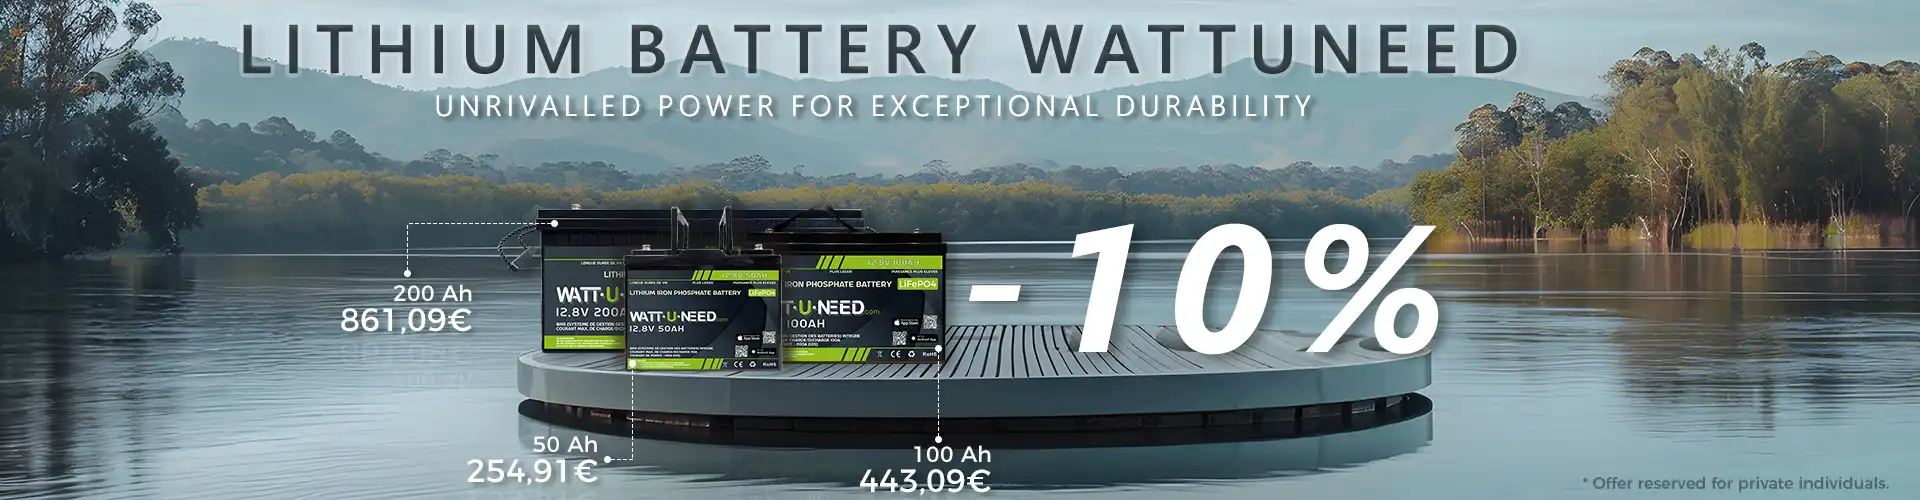 10 percent promotion on Wattuneed batteries with aquatic landscape in the background